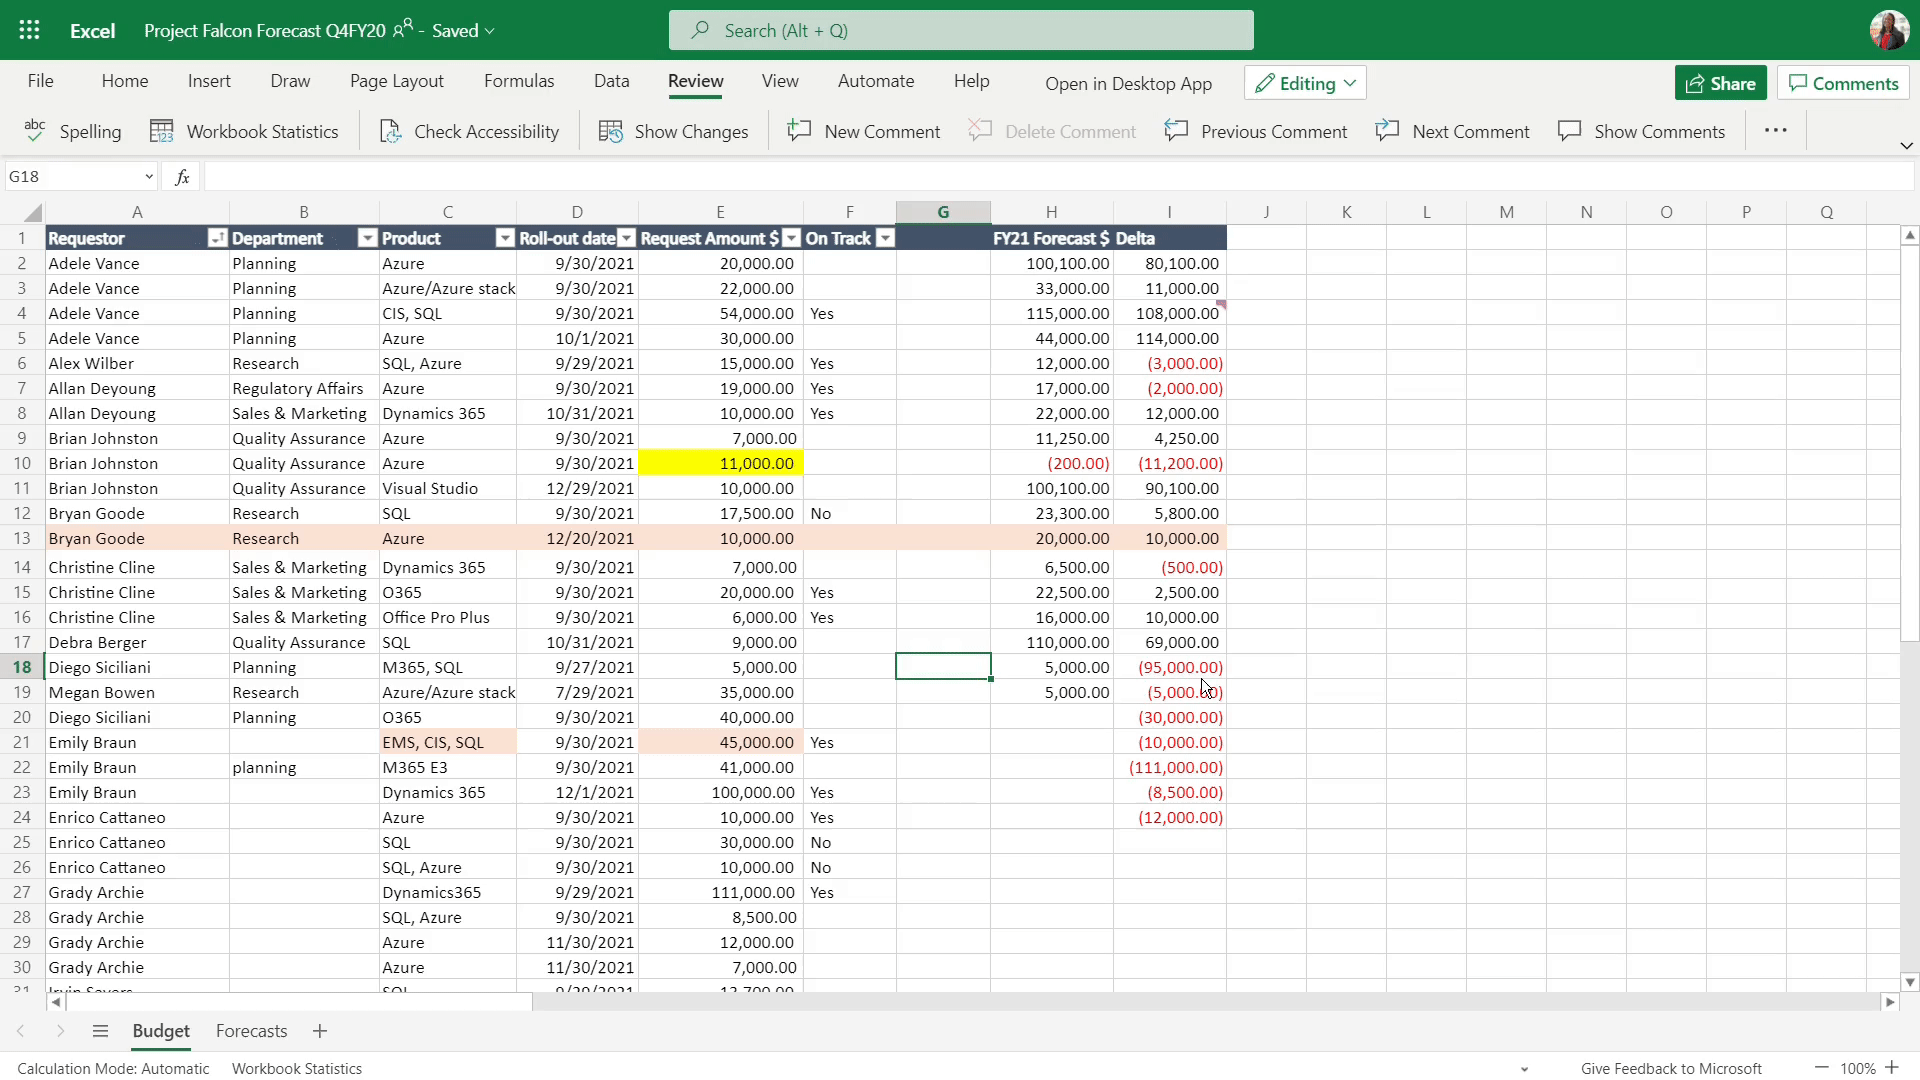 Show Changes in Excel.